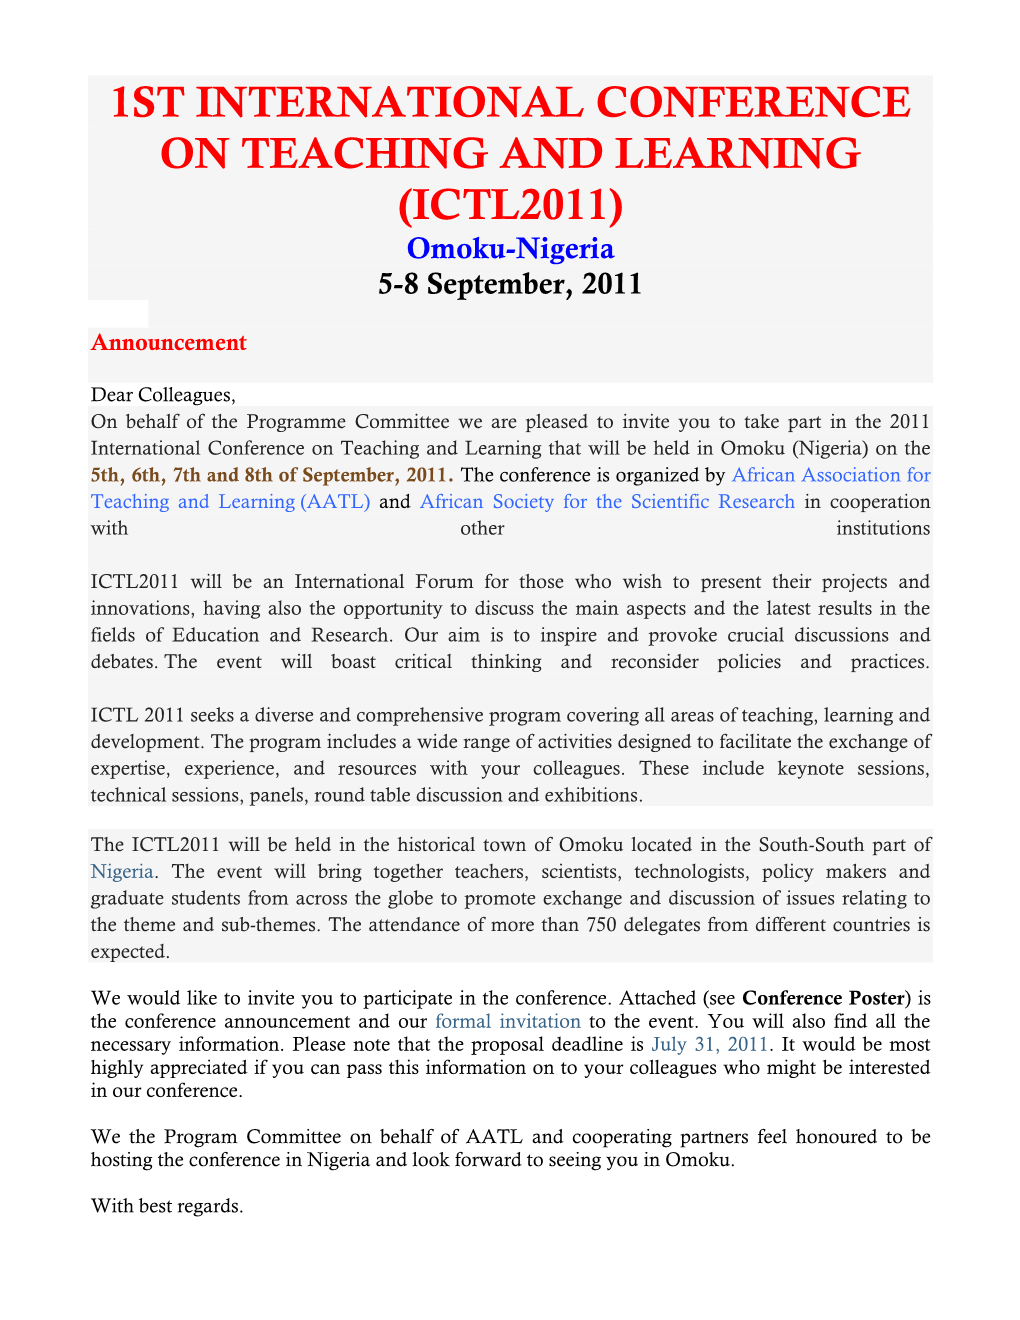 TL 2011 Seeks a Diverse and Comprehensive Program Covering All Areas of Teaching, Learning and Development